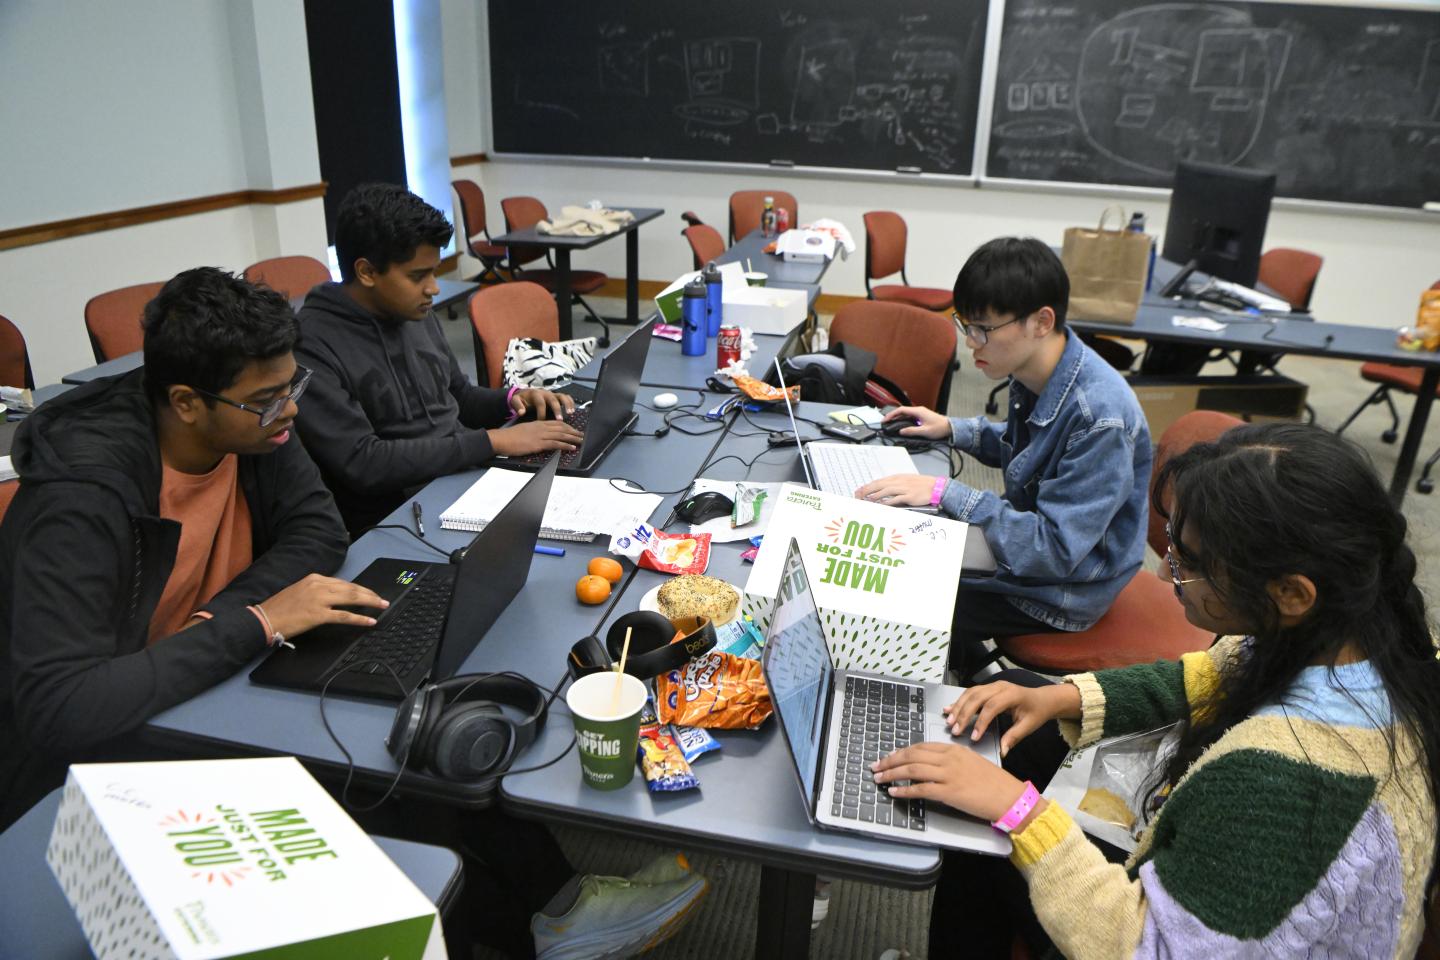 HopHacks students with laptops and a tableful of snacks